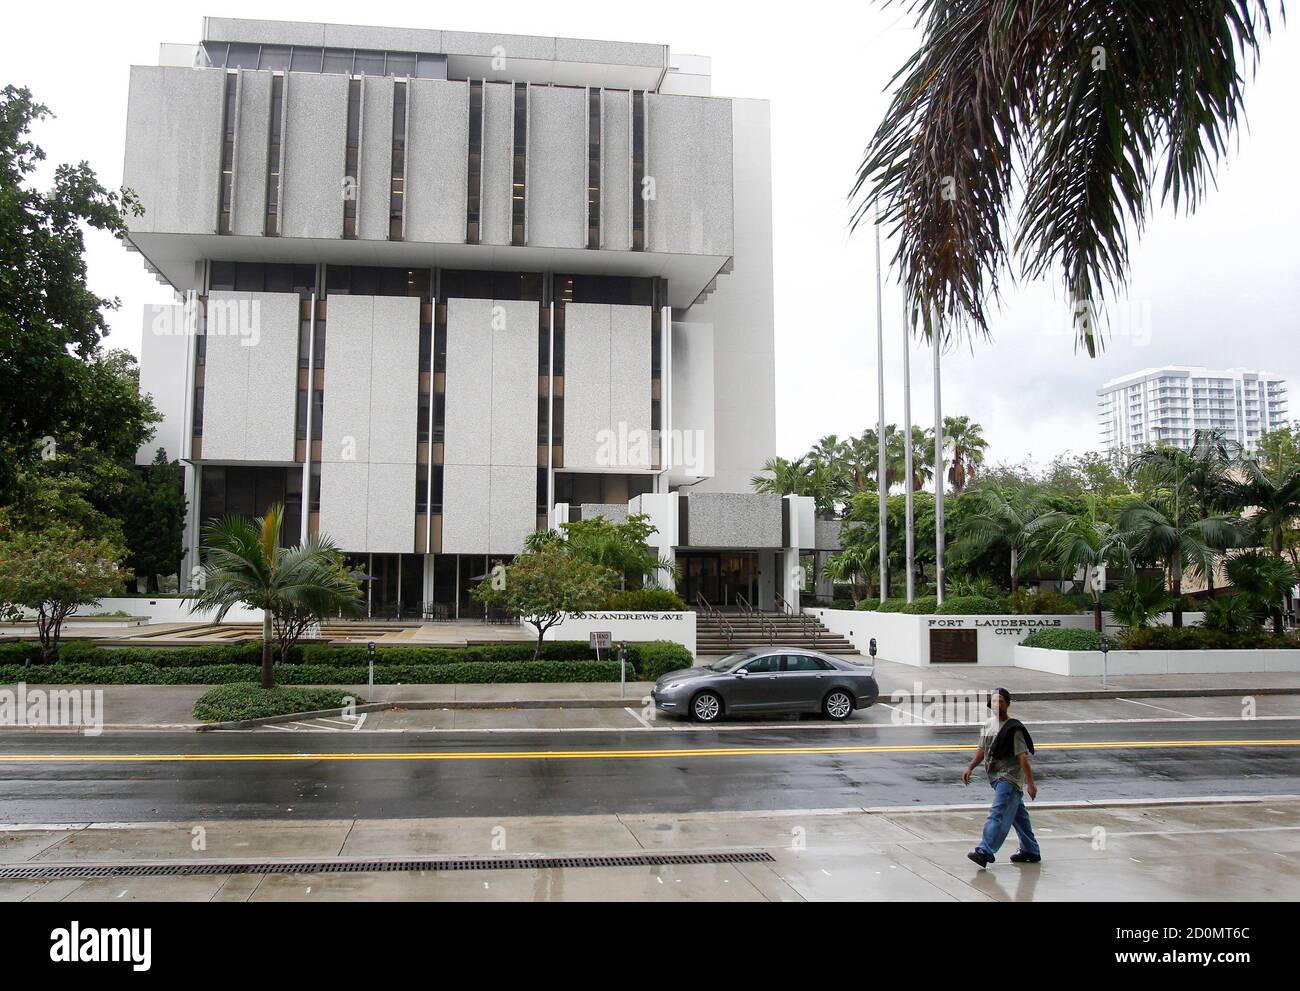 Fort Lauderdale City Hall is seen in Fort Lauderdale, Florida, November 9, 2014. Recent legislations in Fort Lauderdale, which severely limited whether homeless people can be fed in public, affected Arnold P. Abbott, President of the Maureen A. Abbott Love Thy Neighbor Fund, Inc. and Culinary Skills Training Program, which feeds and educates the homeless. REUTERS/Andrew Innerarity (UNITED STATES - Tags: POLITICS SOCIETY POVERTY) Stock Photo